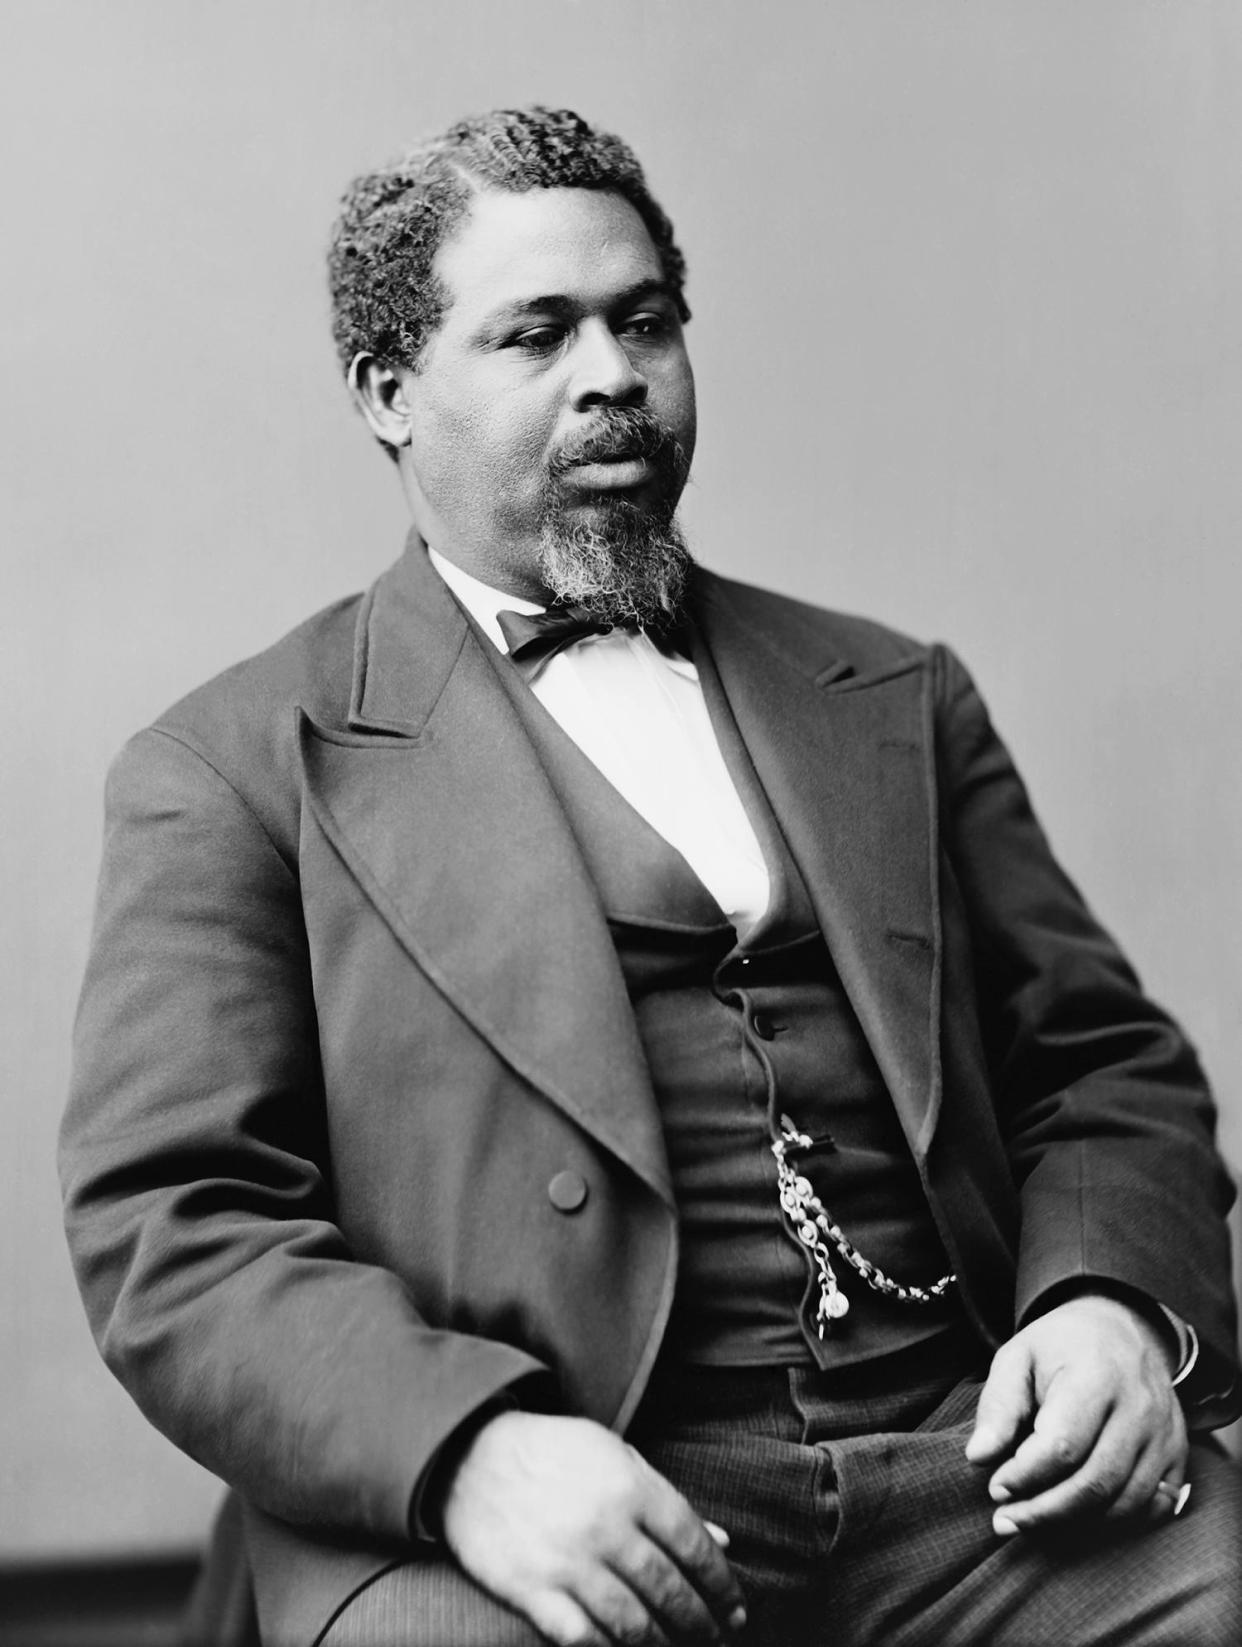 Portrait of Robert Smalls, an enslaved African American who escaped to freedom. (Alamy Stock Photo)